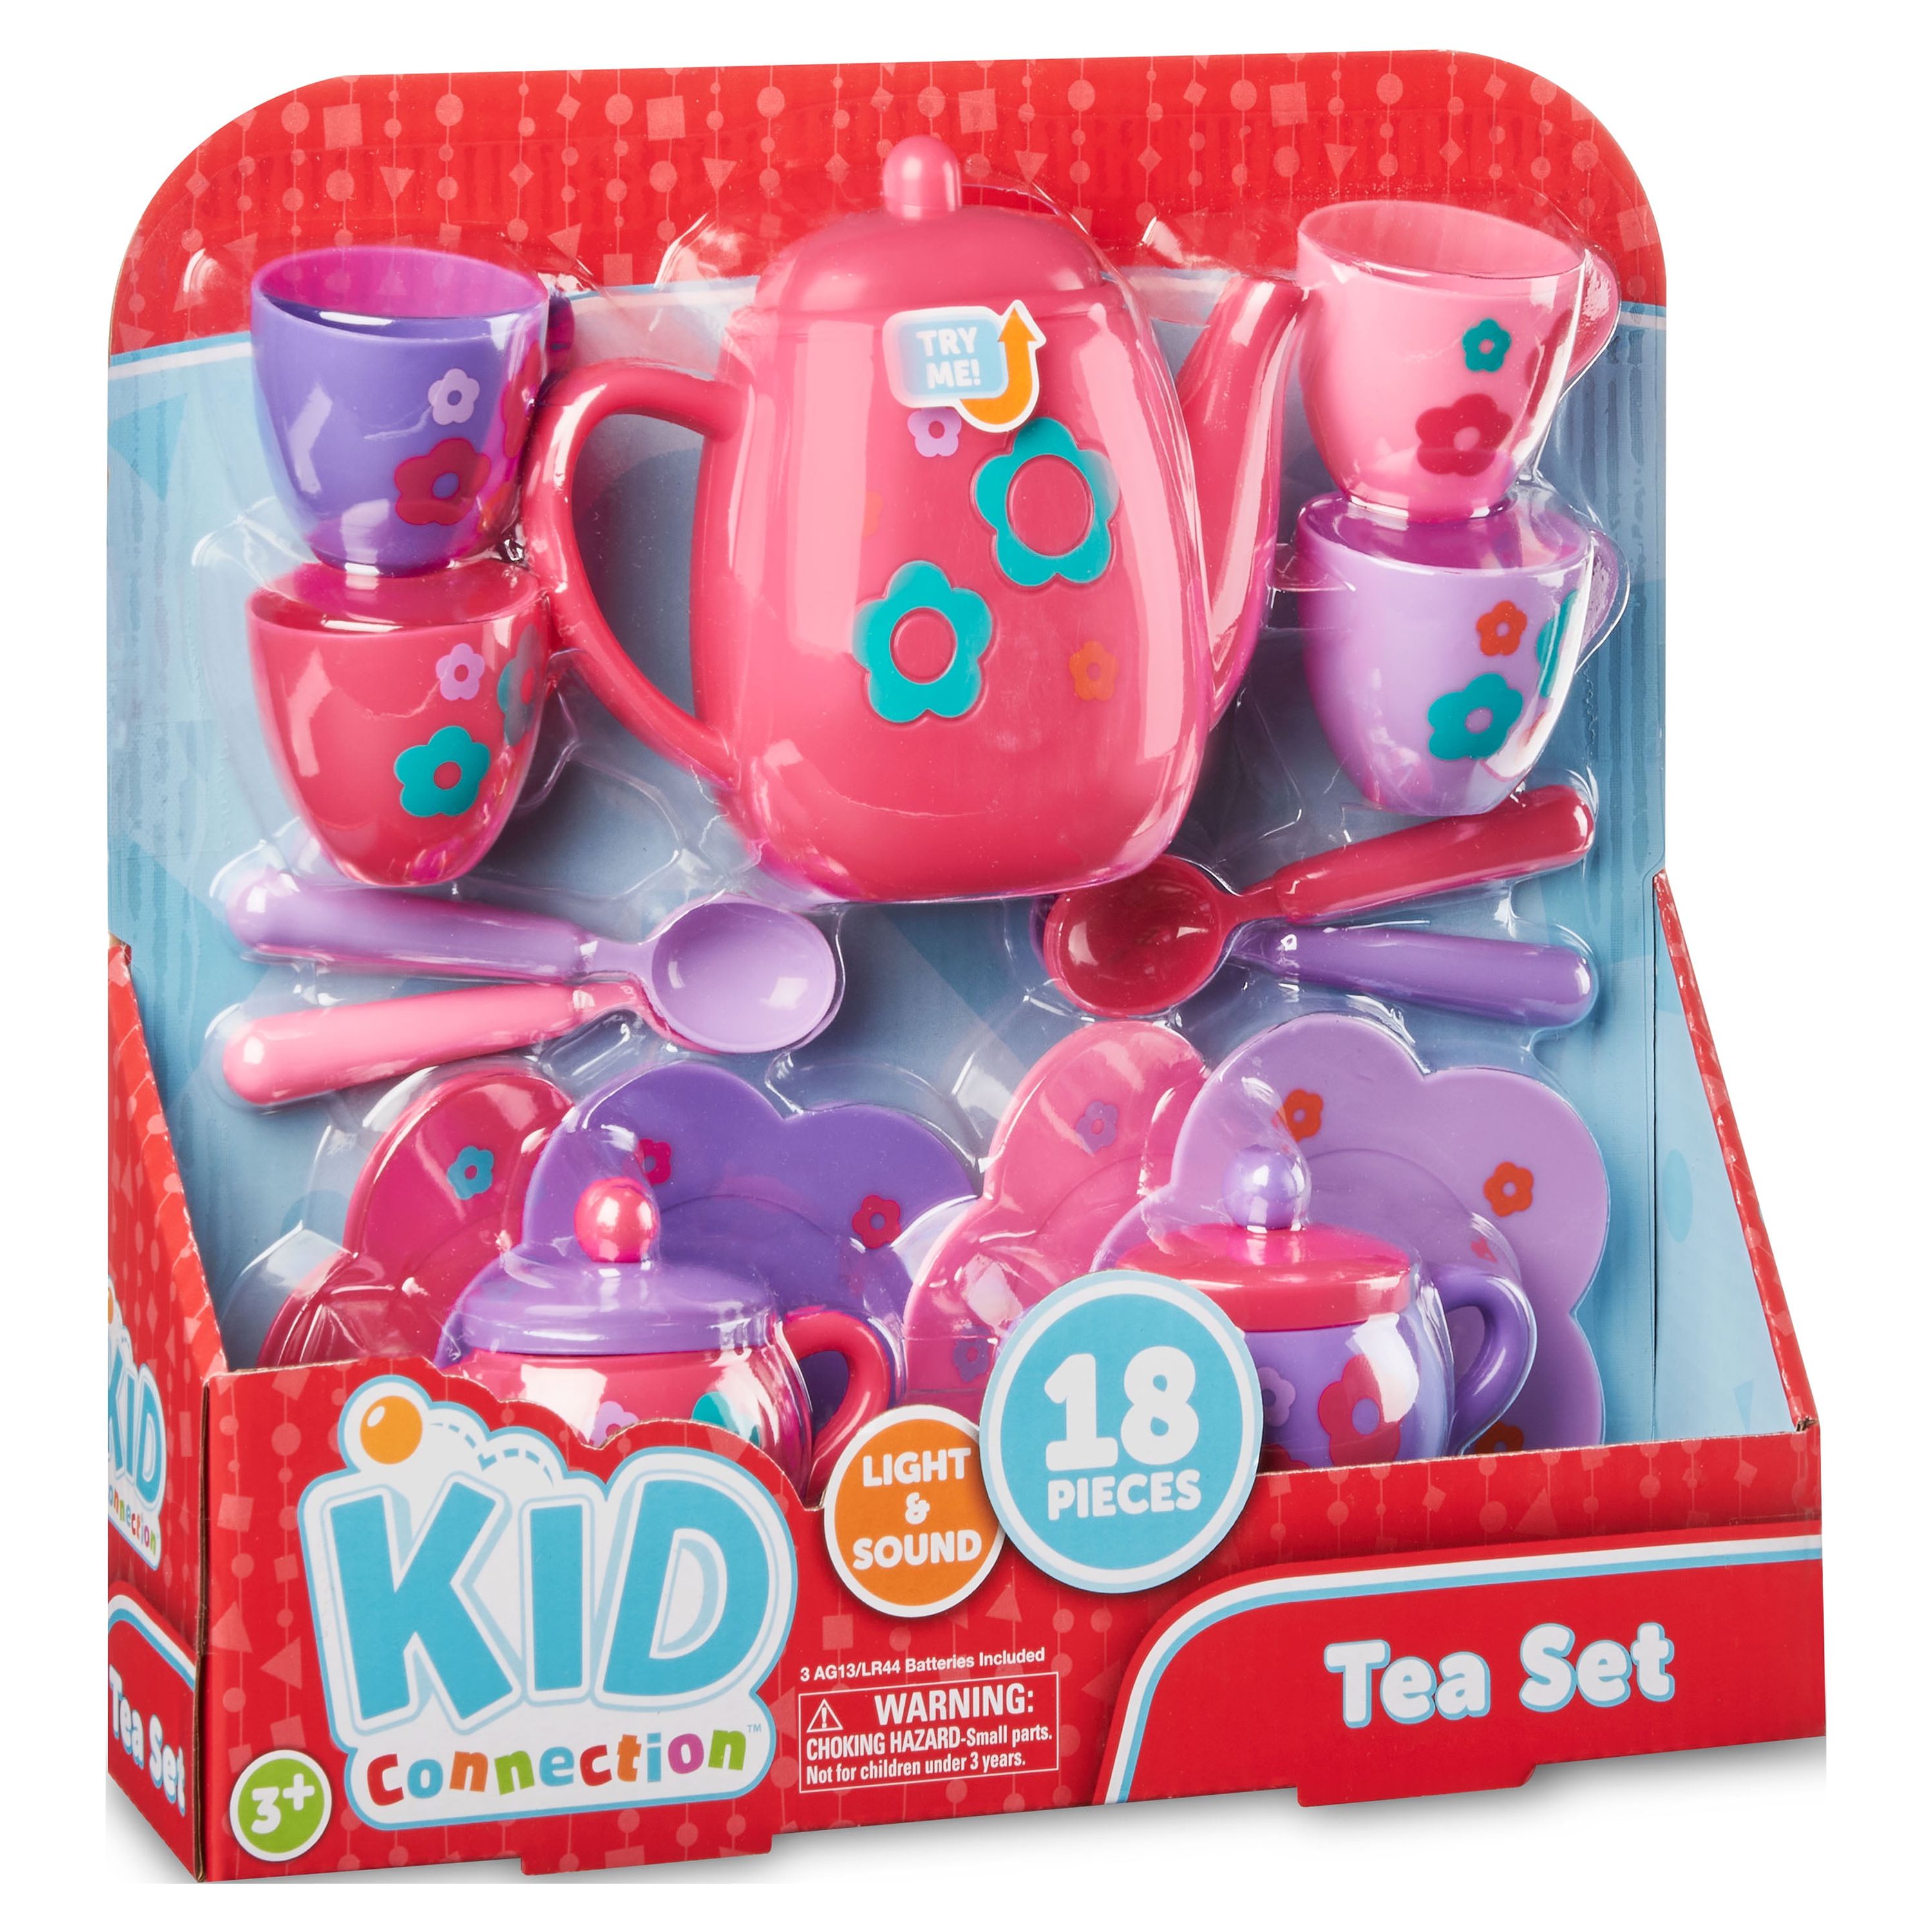 Kid Connection 18-Piece Tea Play Set - image 2 of 5